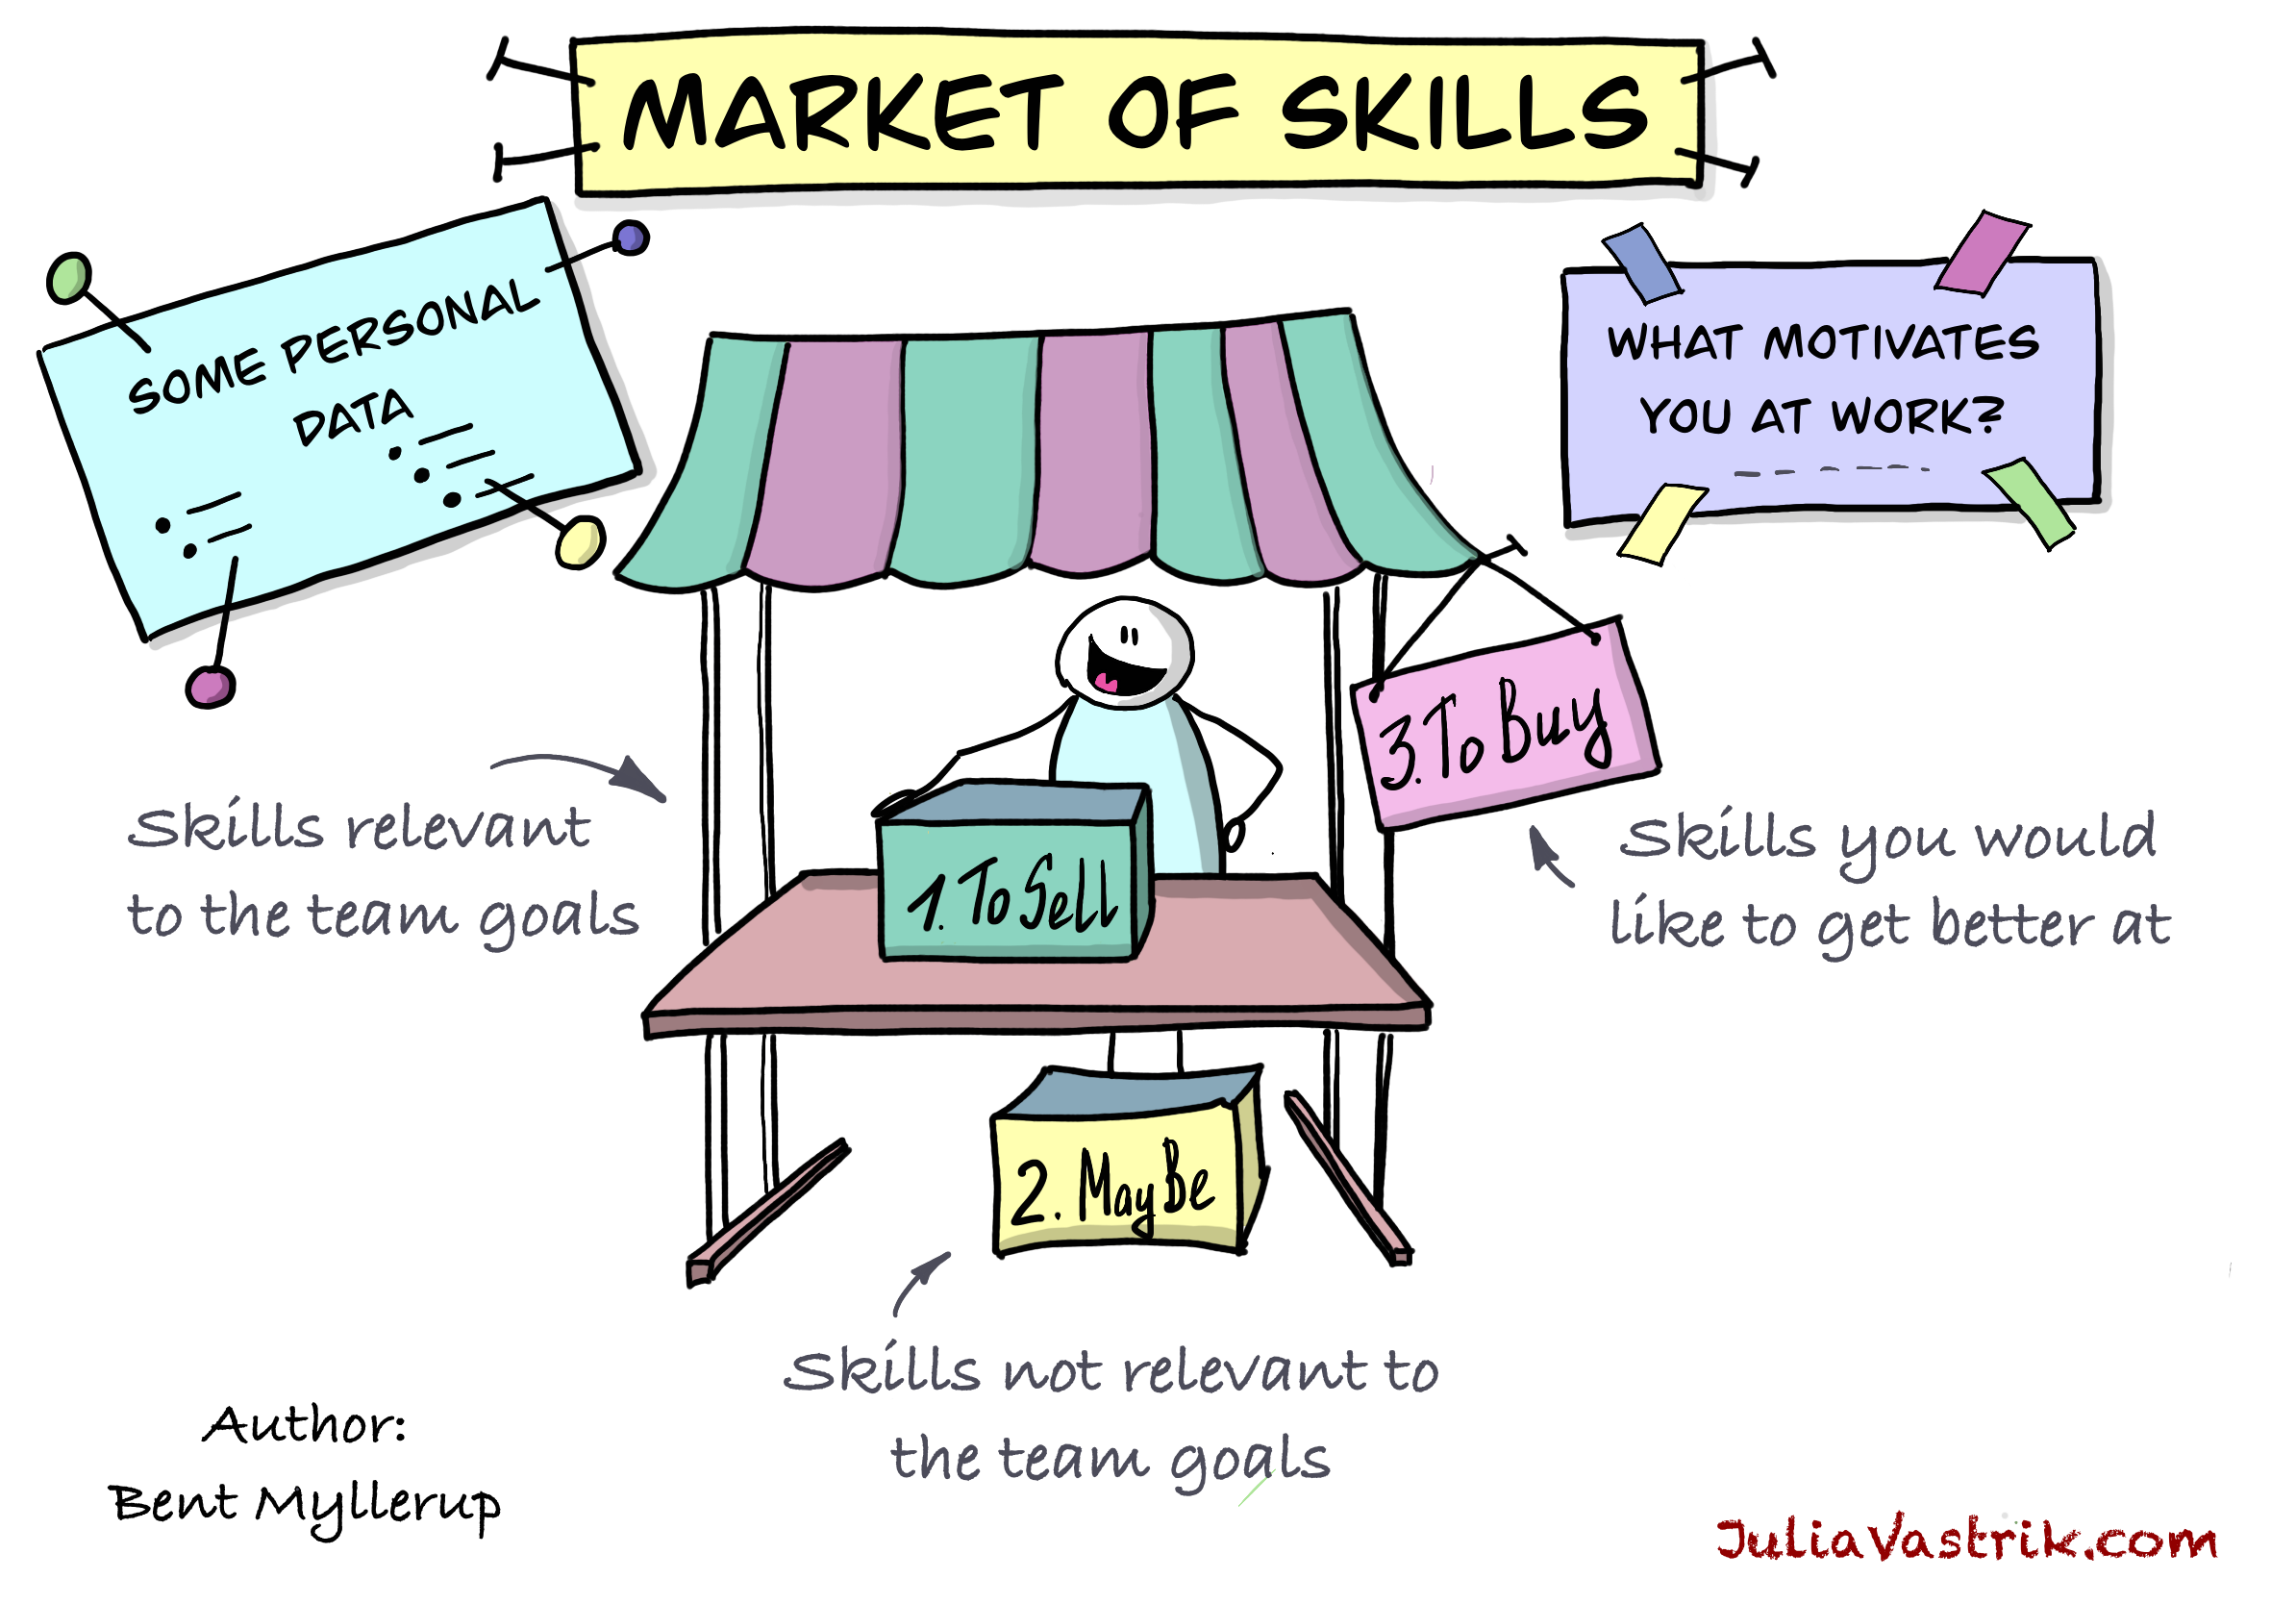 How I run the “Market Of Skills” exercise